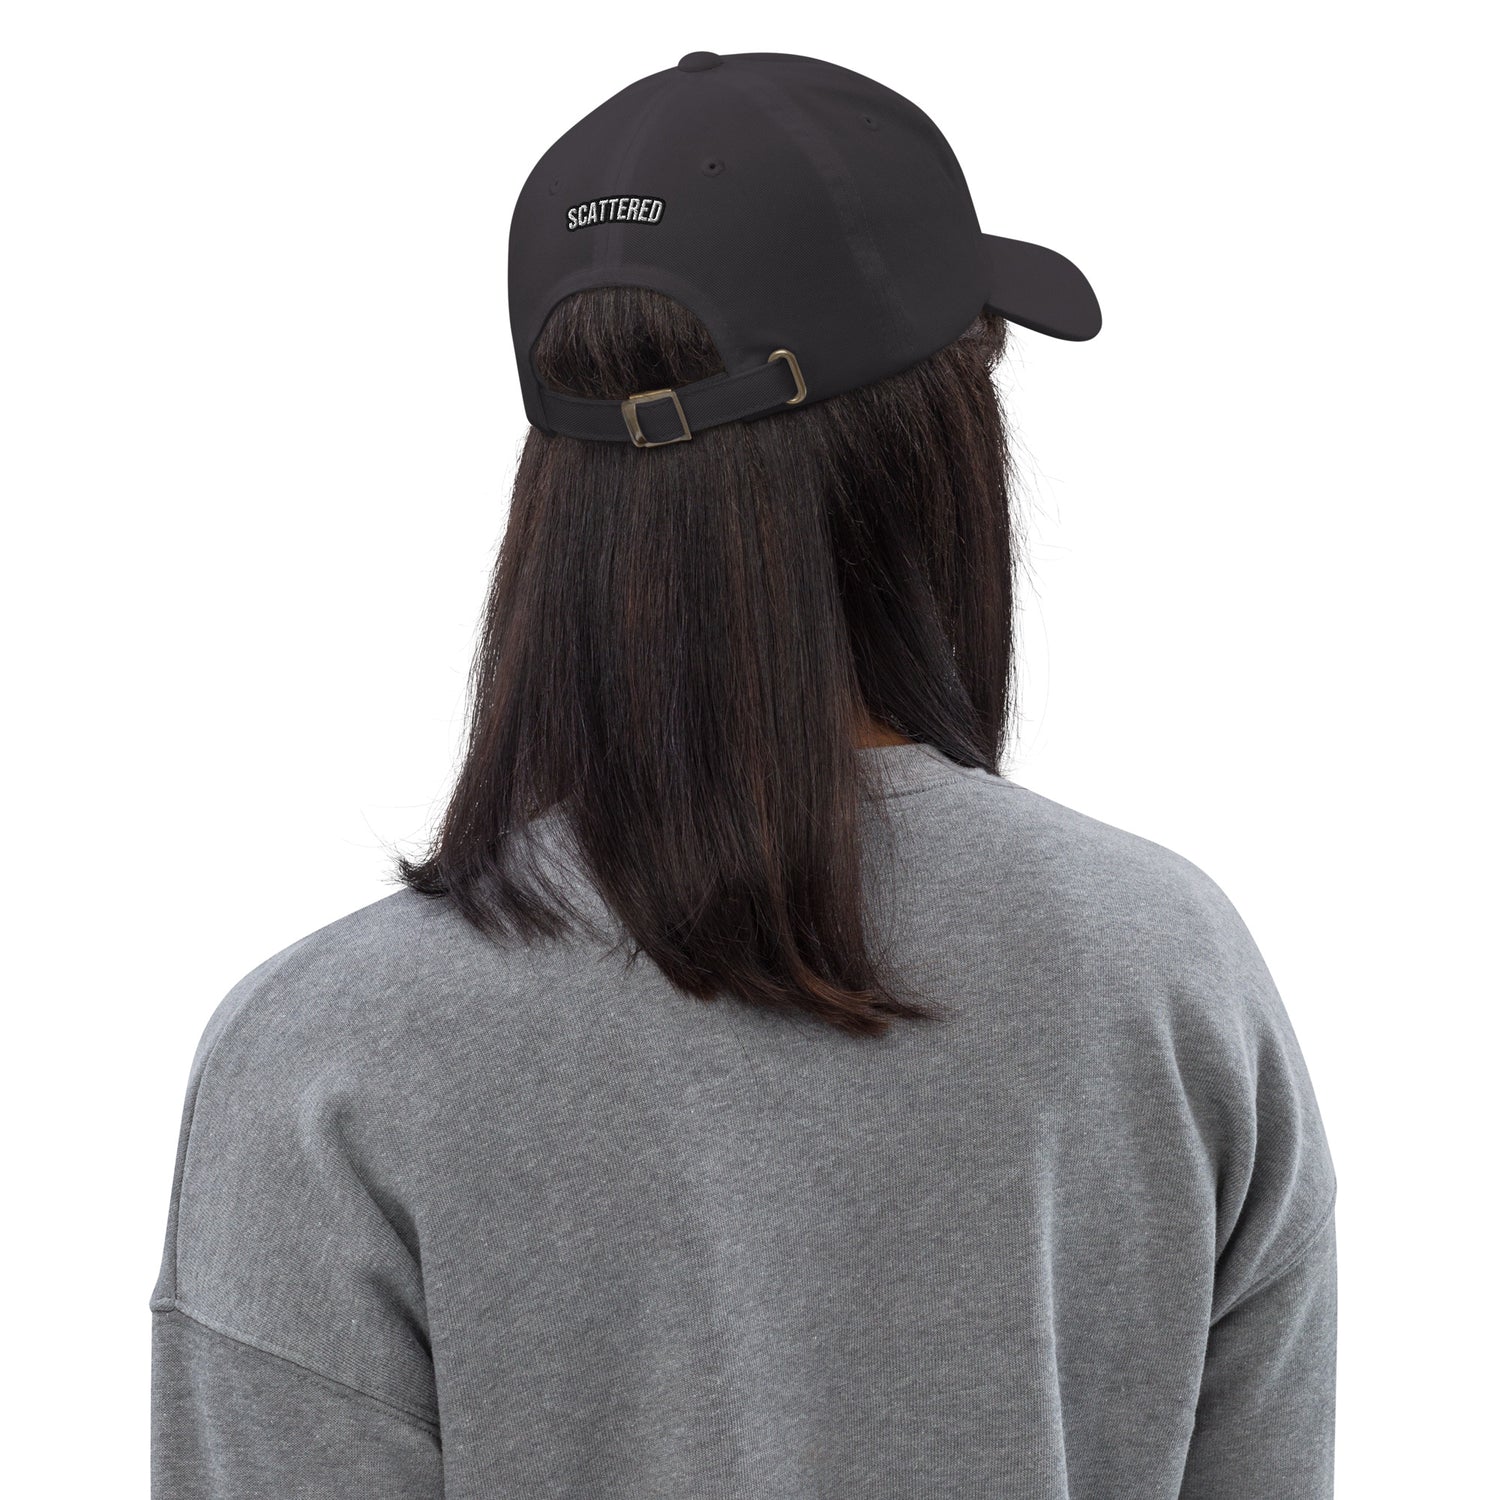 New York Apple Logo Embroidered Charcoal Grey Dad Hat Scattered Streetwear